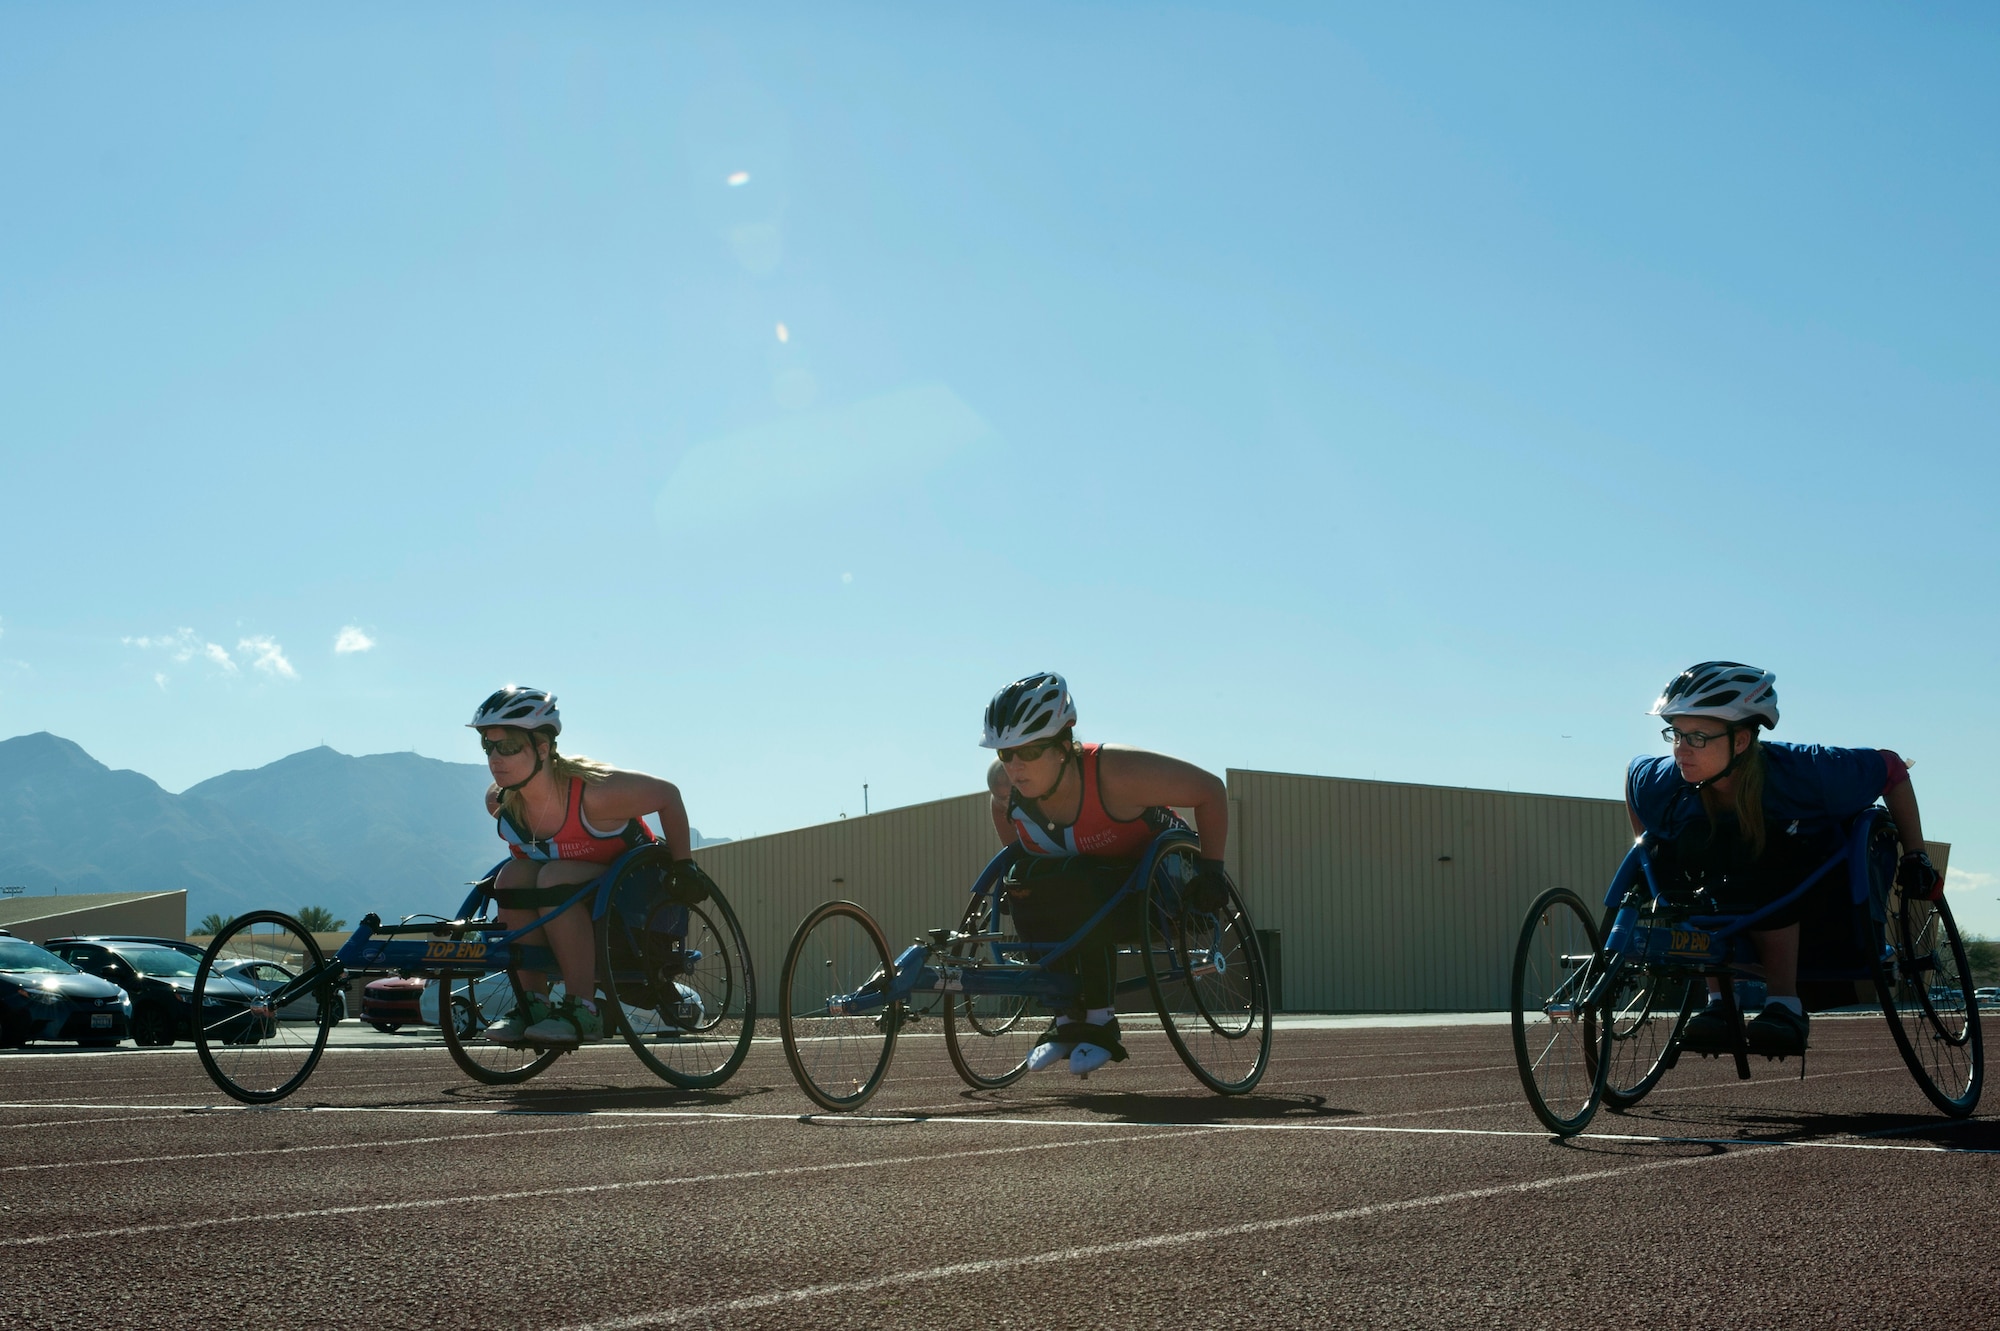 (From left to right) Anna Pollock, Carolyne Dufley and Kristina Morin, 2015 U.S. Air Force Trials participants, line up at the starting line prior to a race at Nellis Air Force Base, Nev., March 3, 2015. Dufley took first place, Pollock took a close second and Morin finished third. (U.S. Air Force photo by Senior Airman Timothy Young)